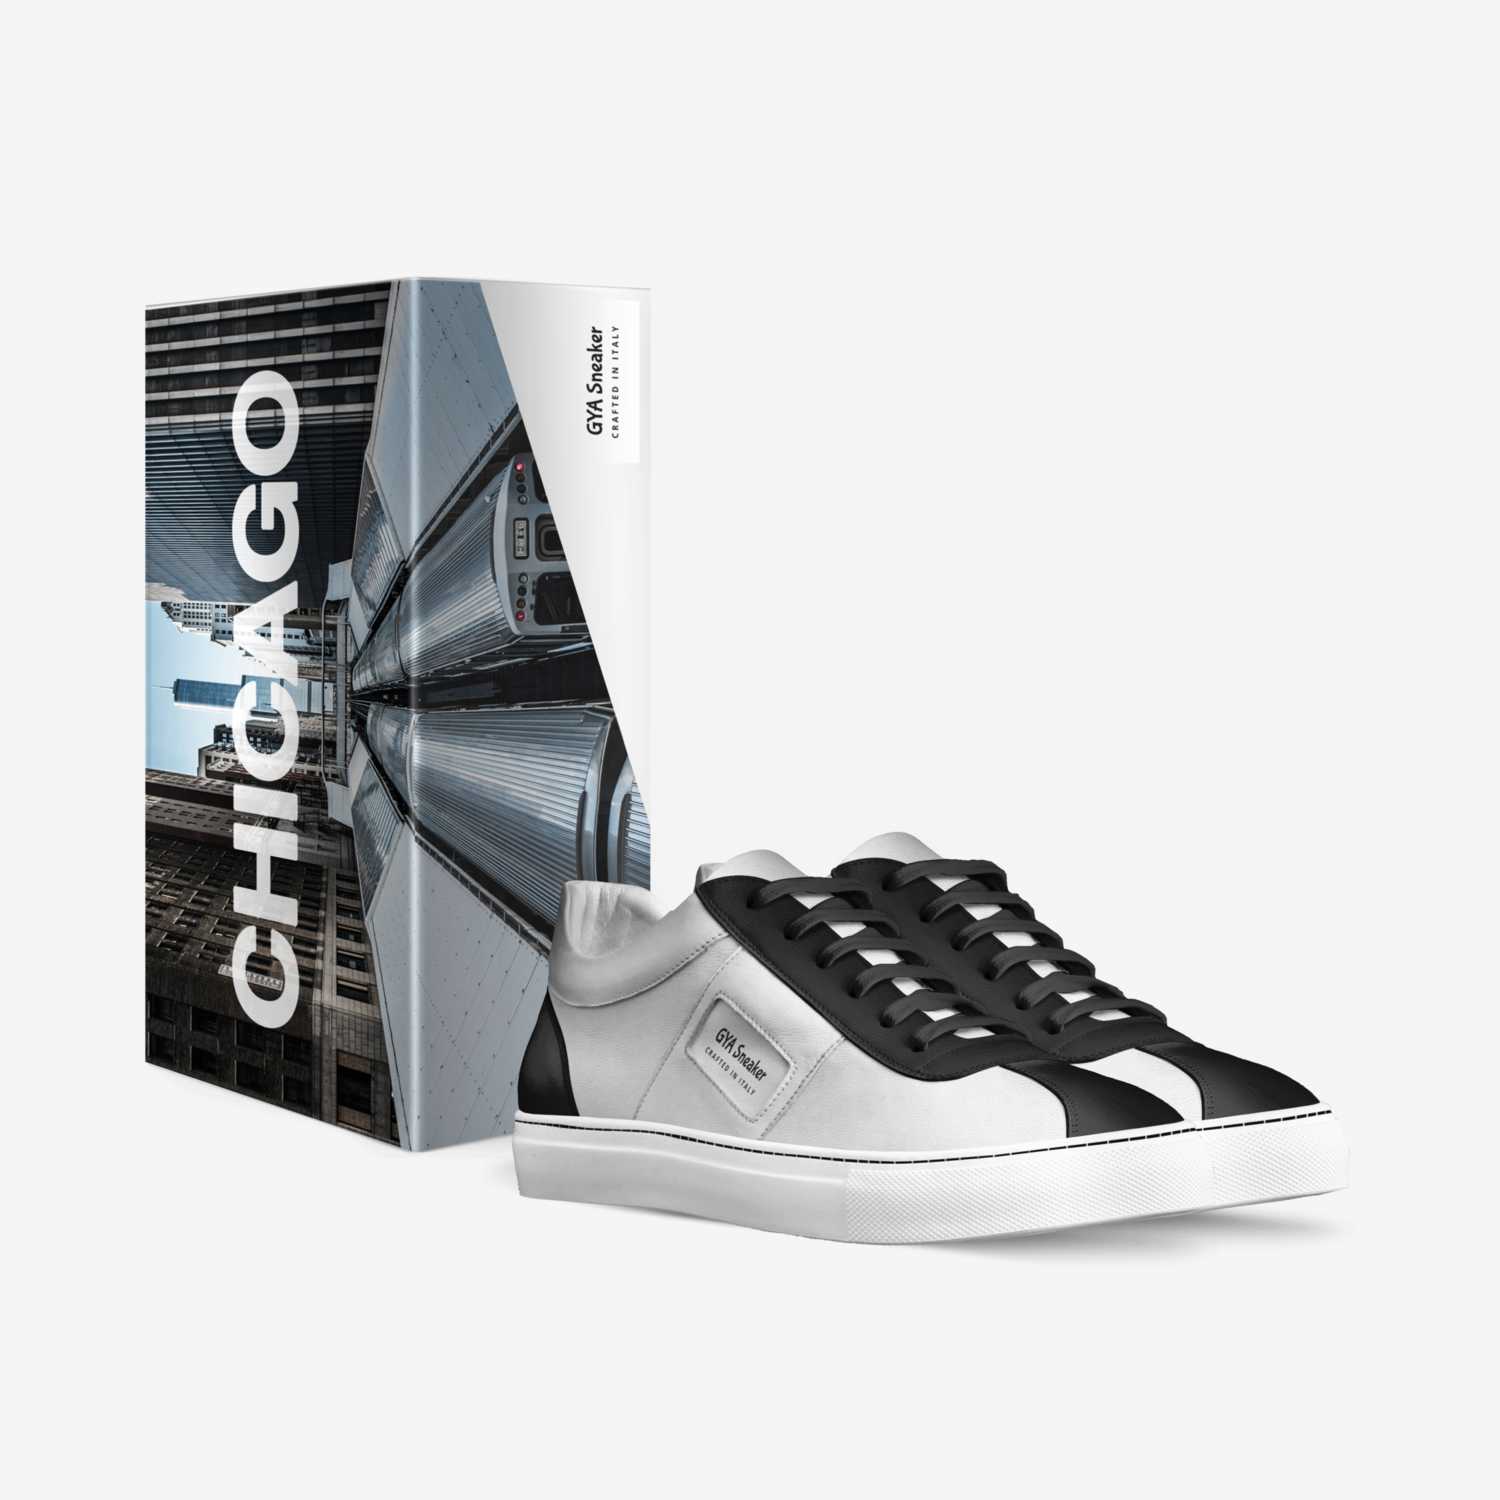 GYA Sneaker custom made in Italy shoes by Stephen Boyd | Box view